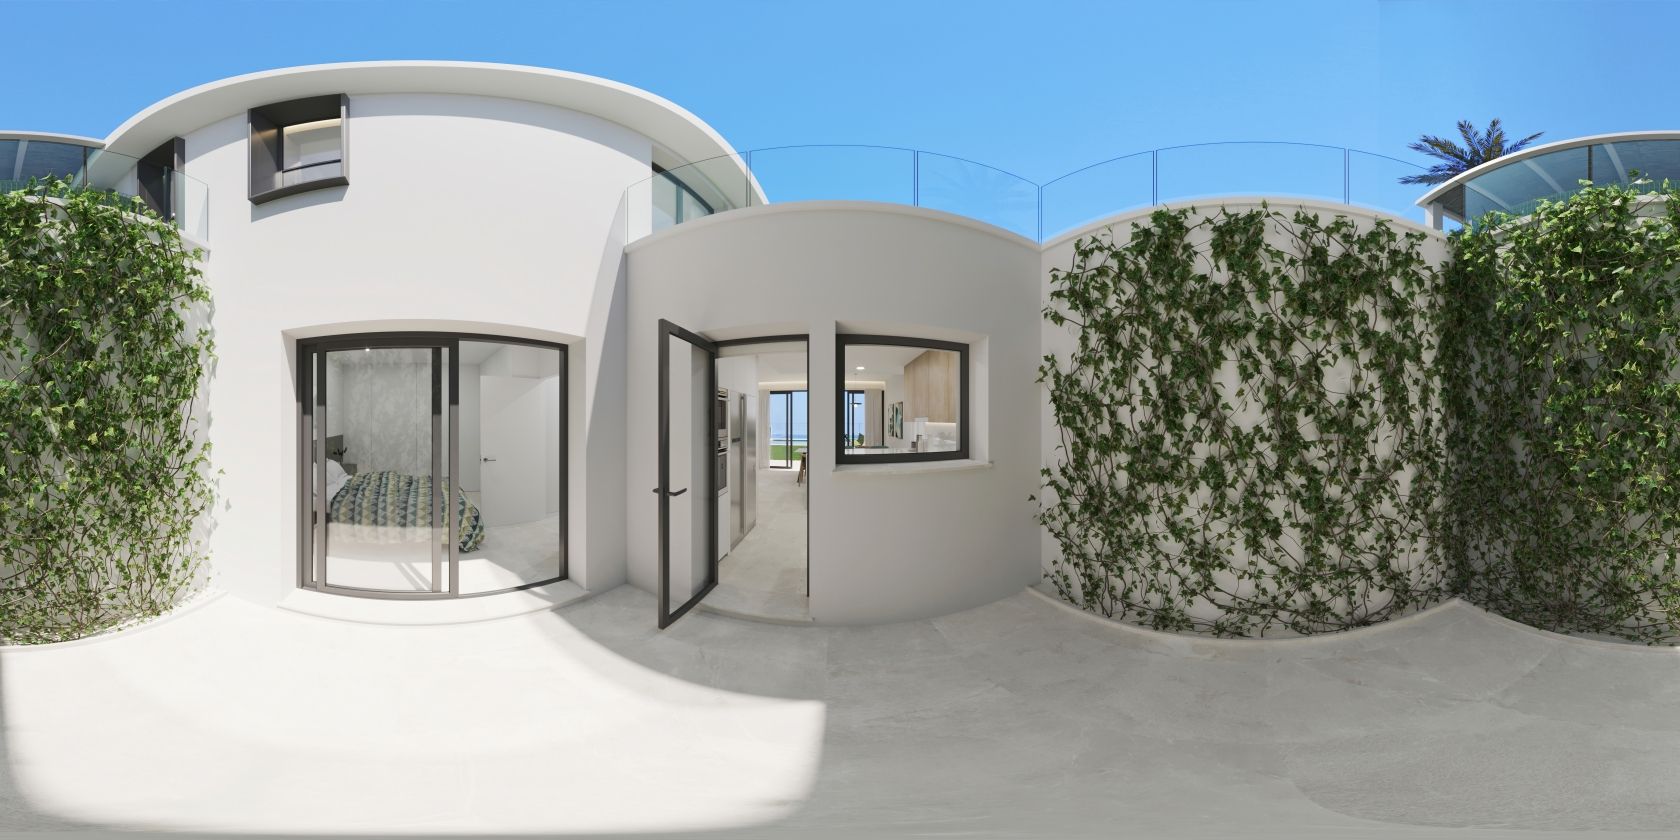 FOR SALE NEW DETACHED VILLAS WITH GARDEN AND POOL IN ALICANTE